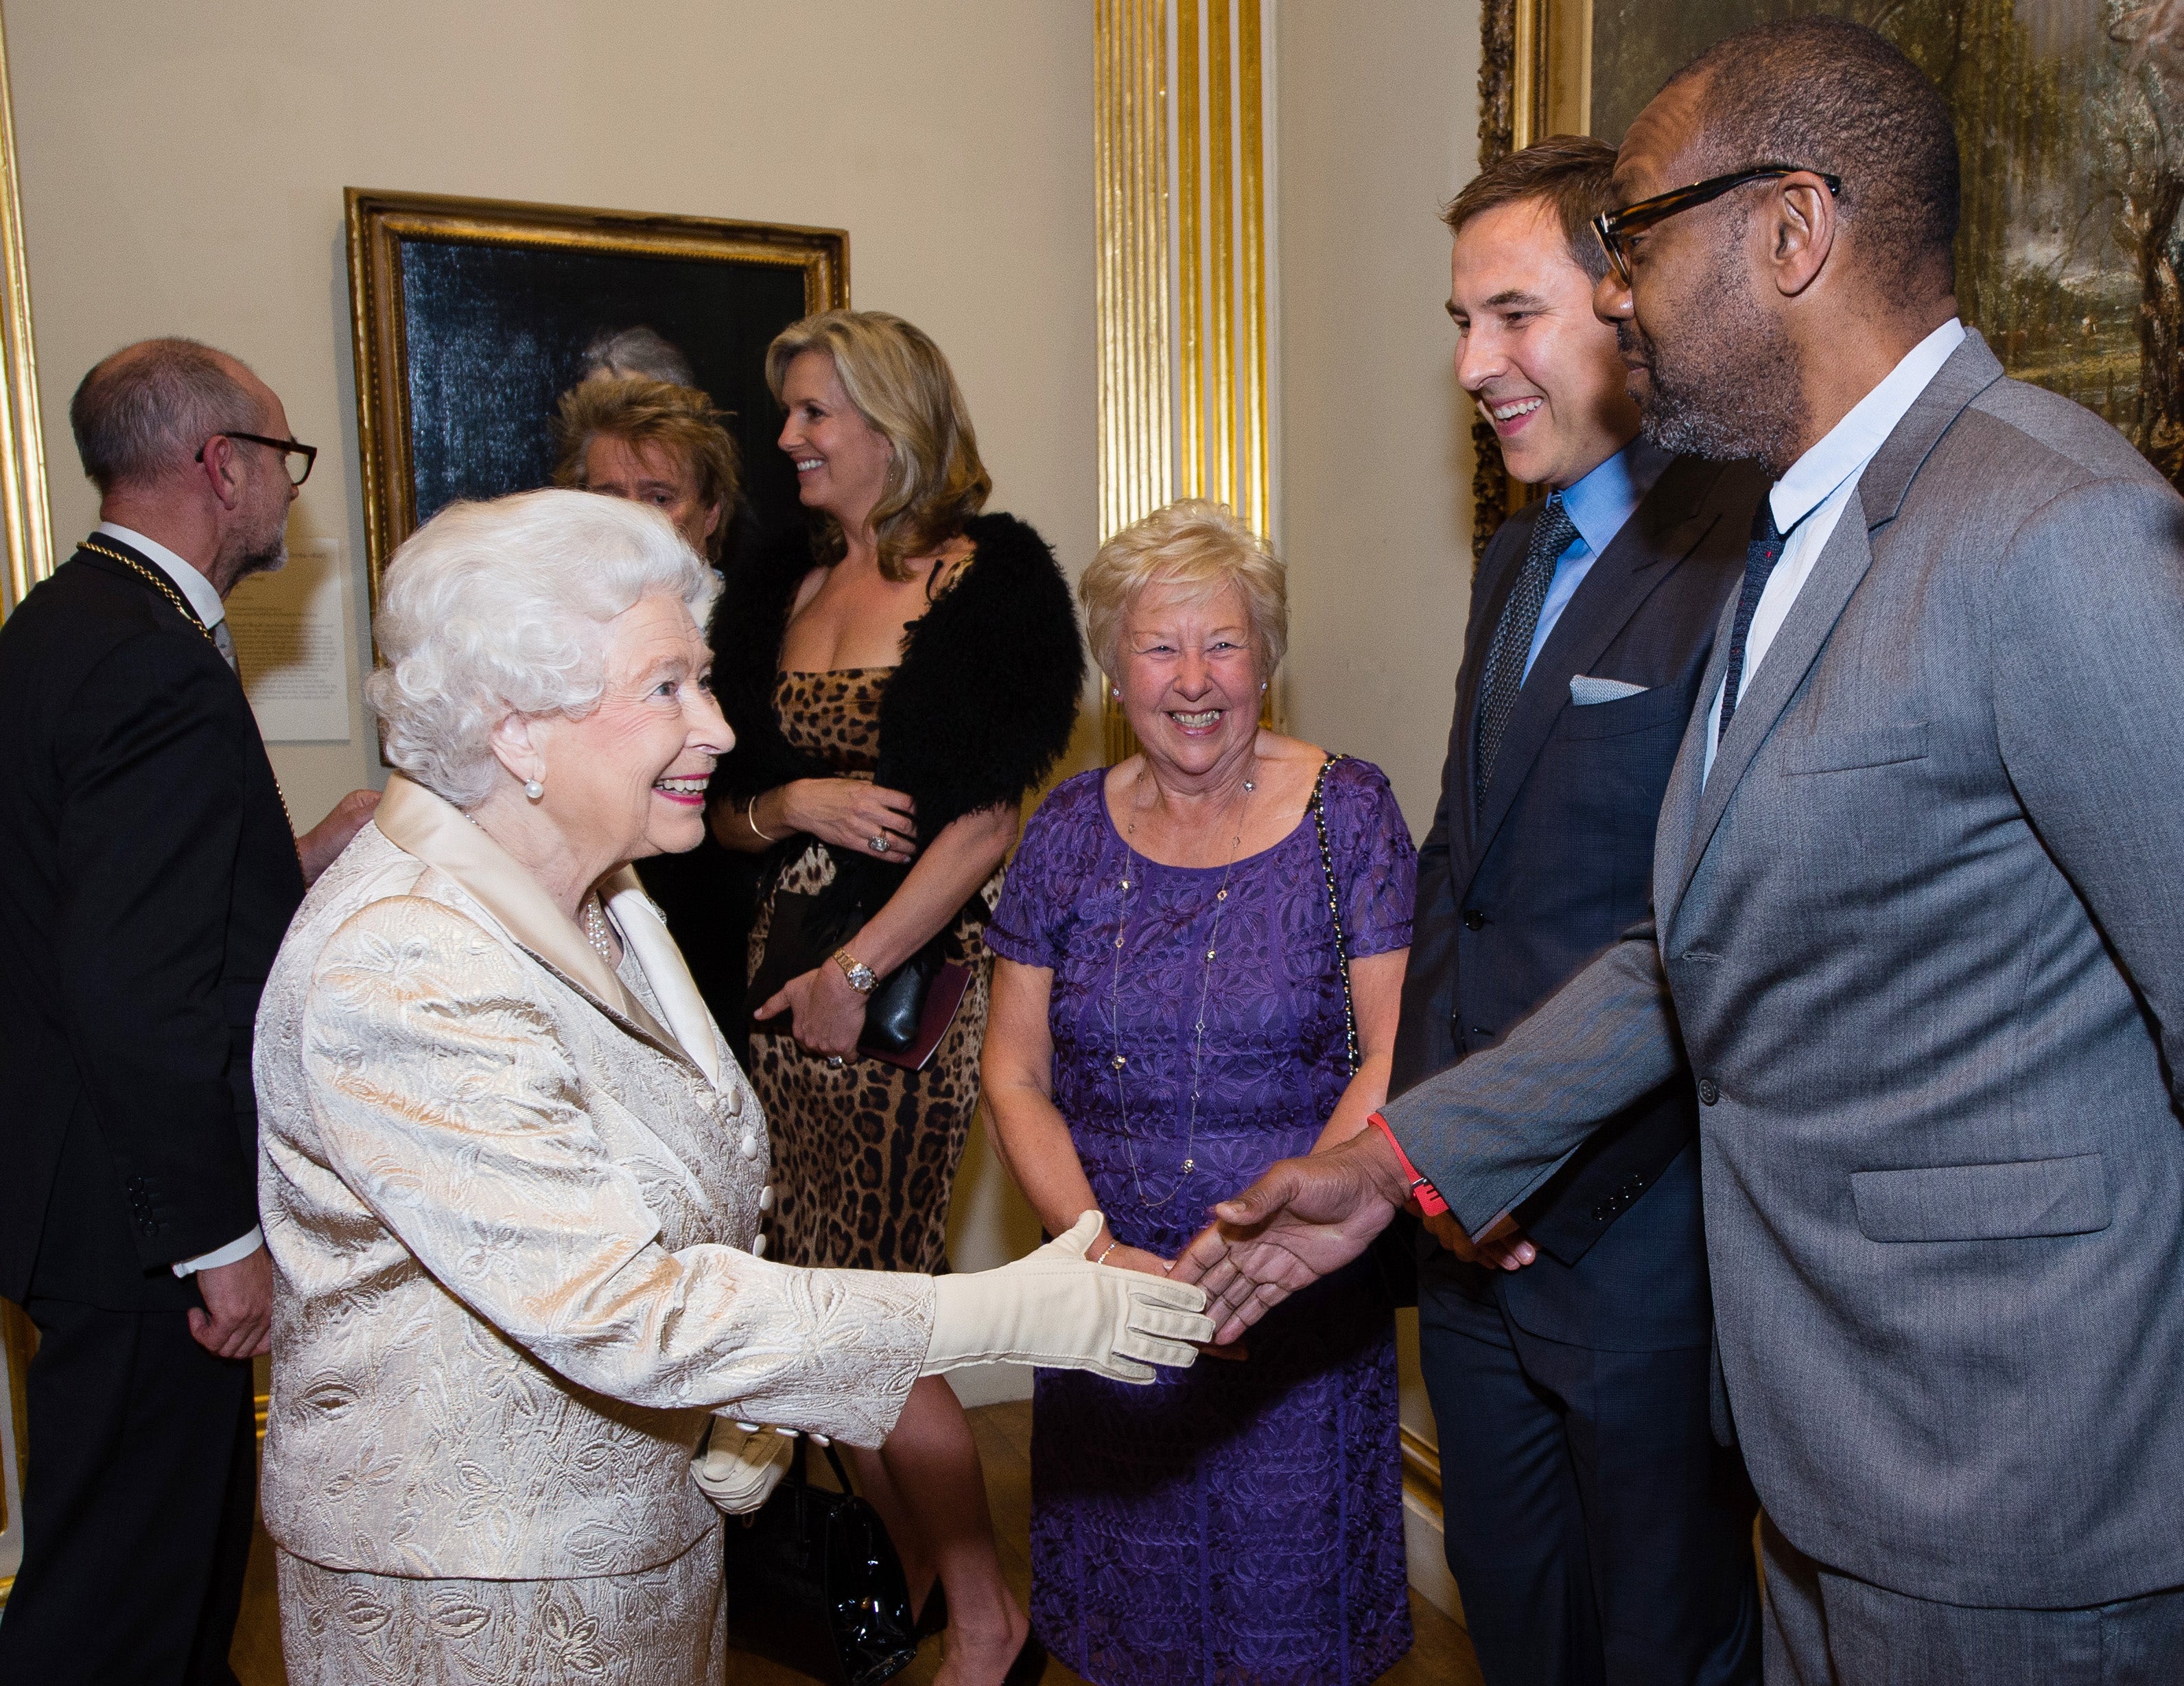 Queen Elizabeth II greets Lenny Henry at London’s Royal Academy of Arts on 11 October 2016